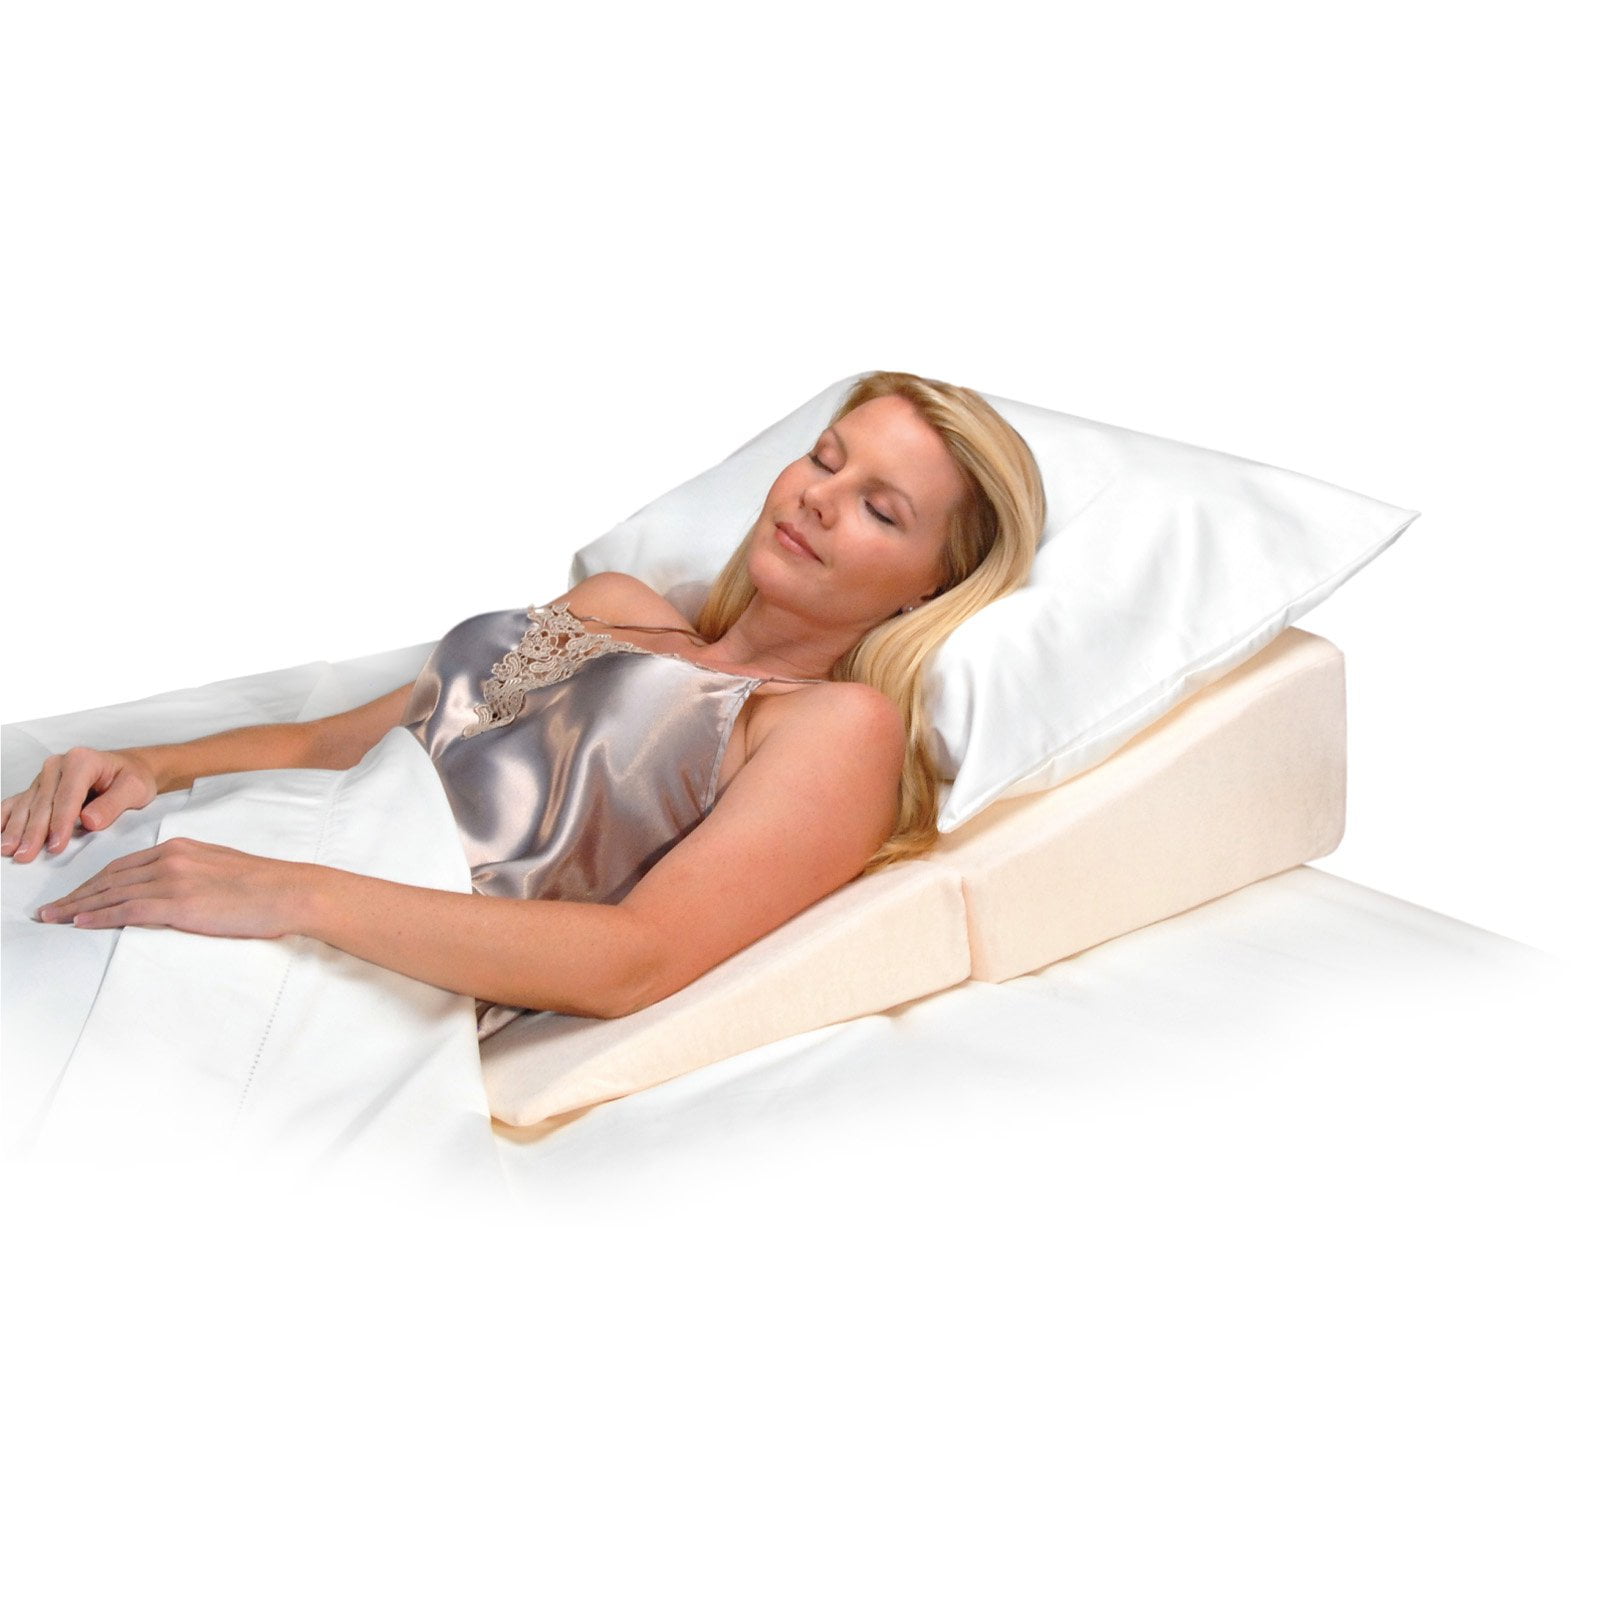 A Wedge Pillow For Hip Pain Can Help You Sleep • Wedge Pillow Blog